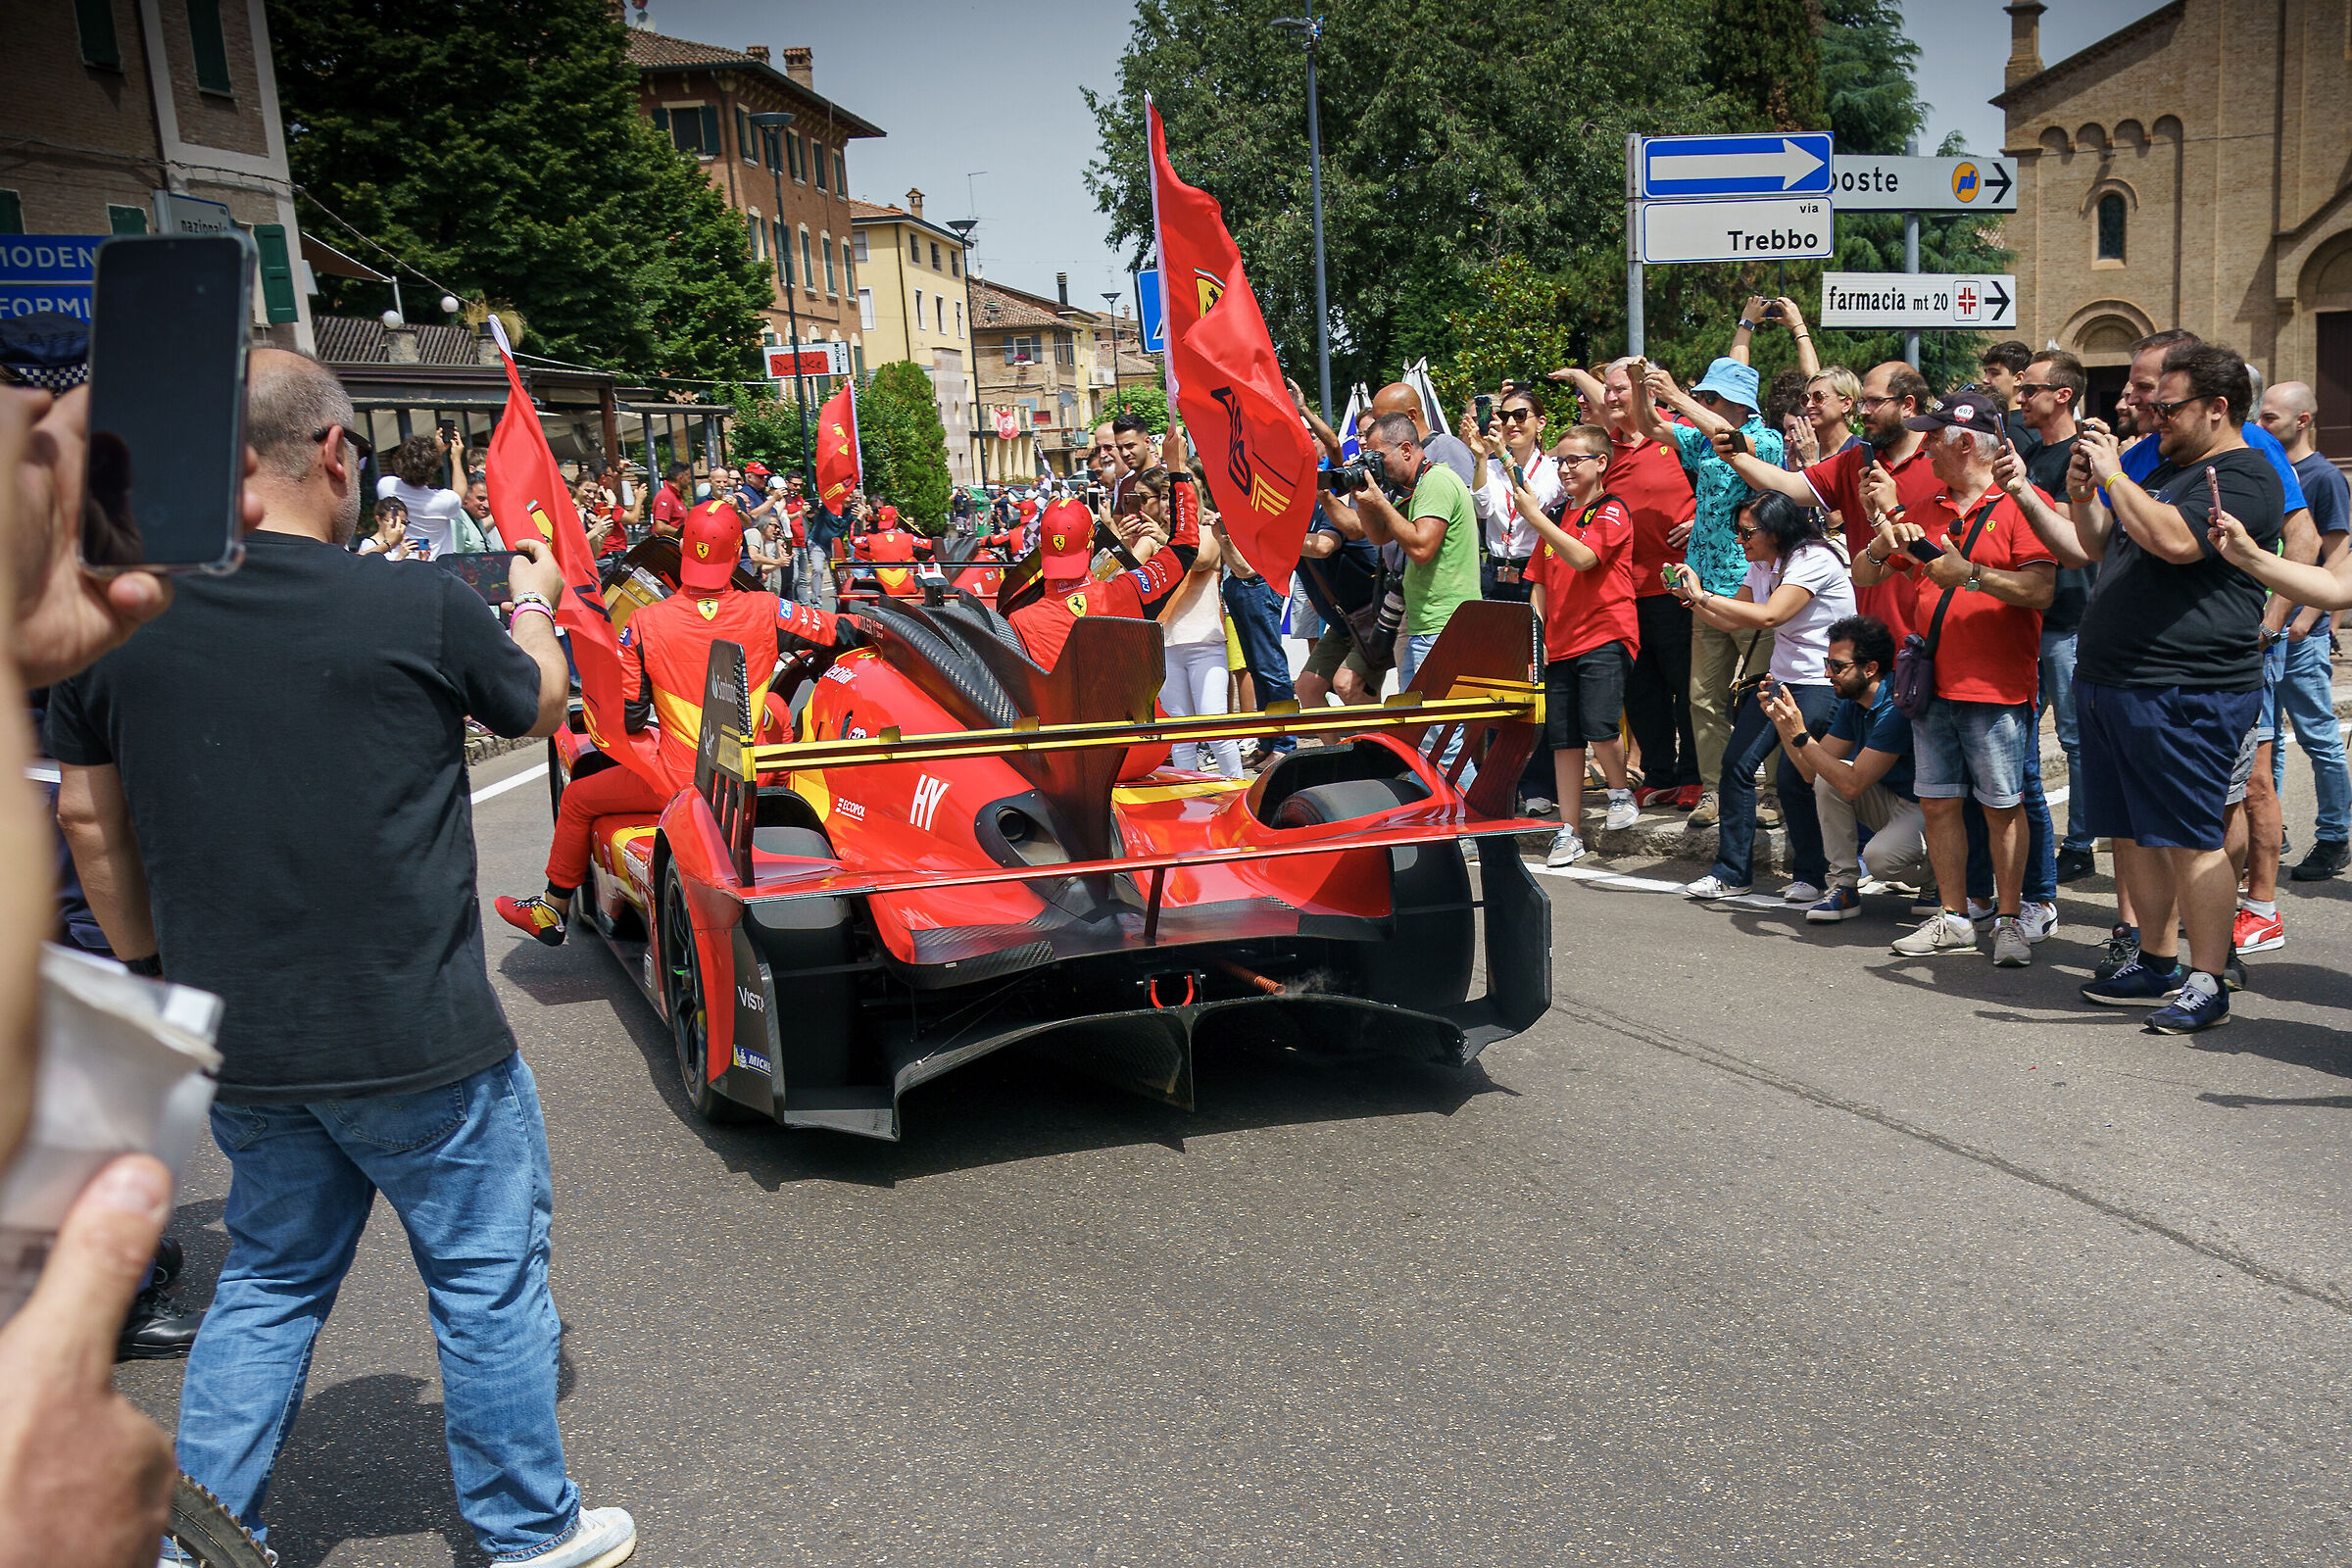 In Maranello with the winning Ferraris at Le Mans...